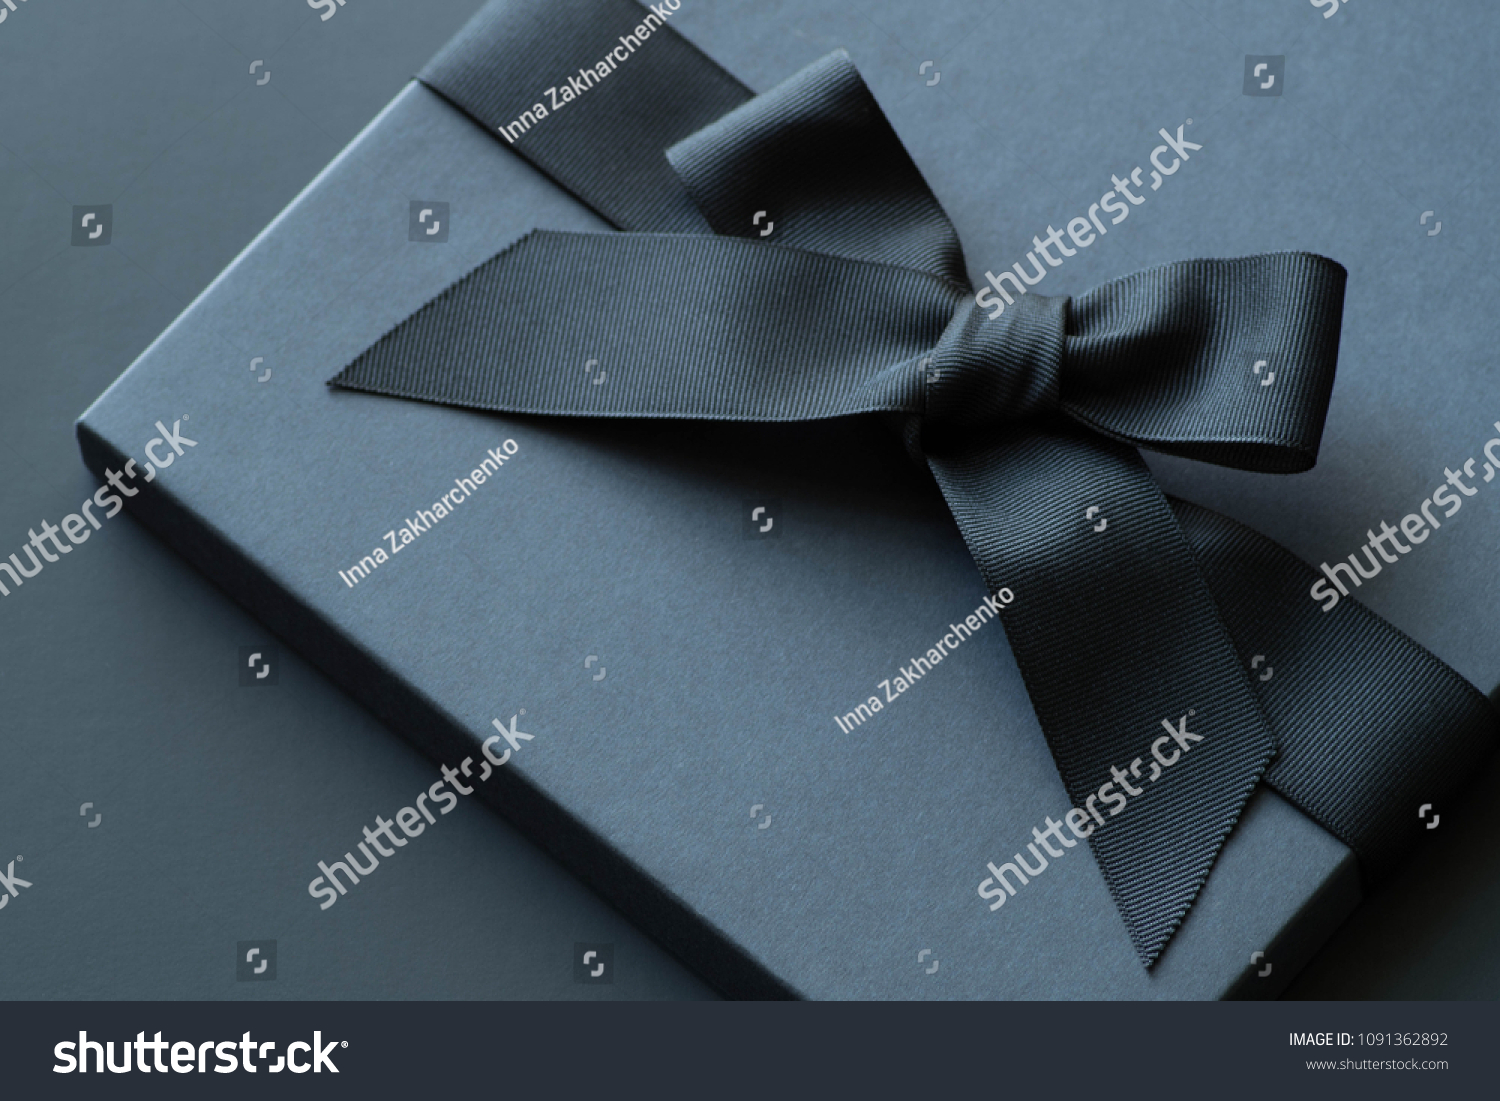 Black gift box on a dark contrasted background, decorated with a textured bow and feathers, creating a romantic atmosphere. Typically used for birthday, anniversary presents, gift cards, post cards. #1091362892